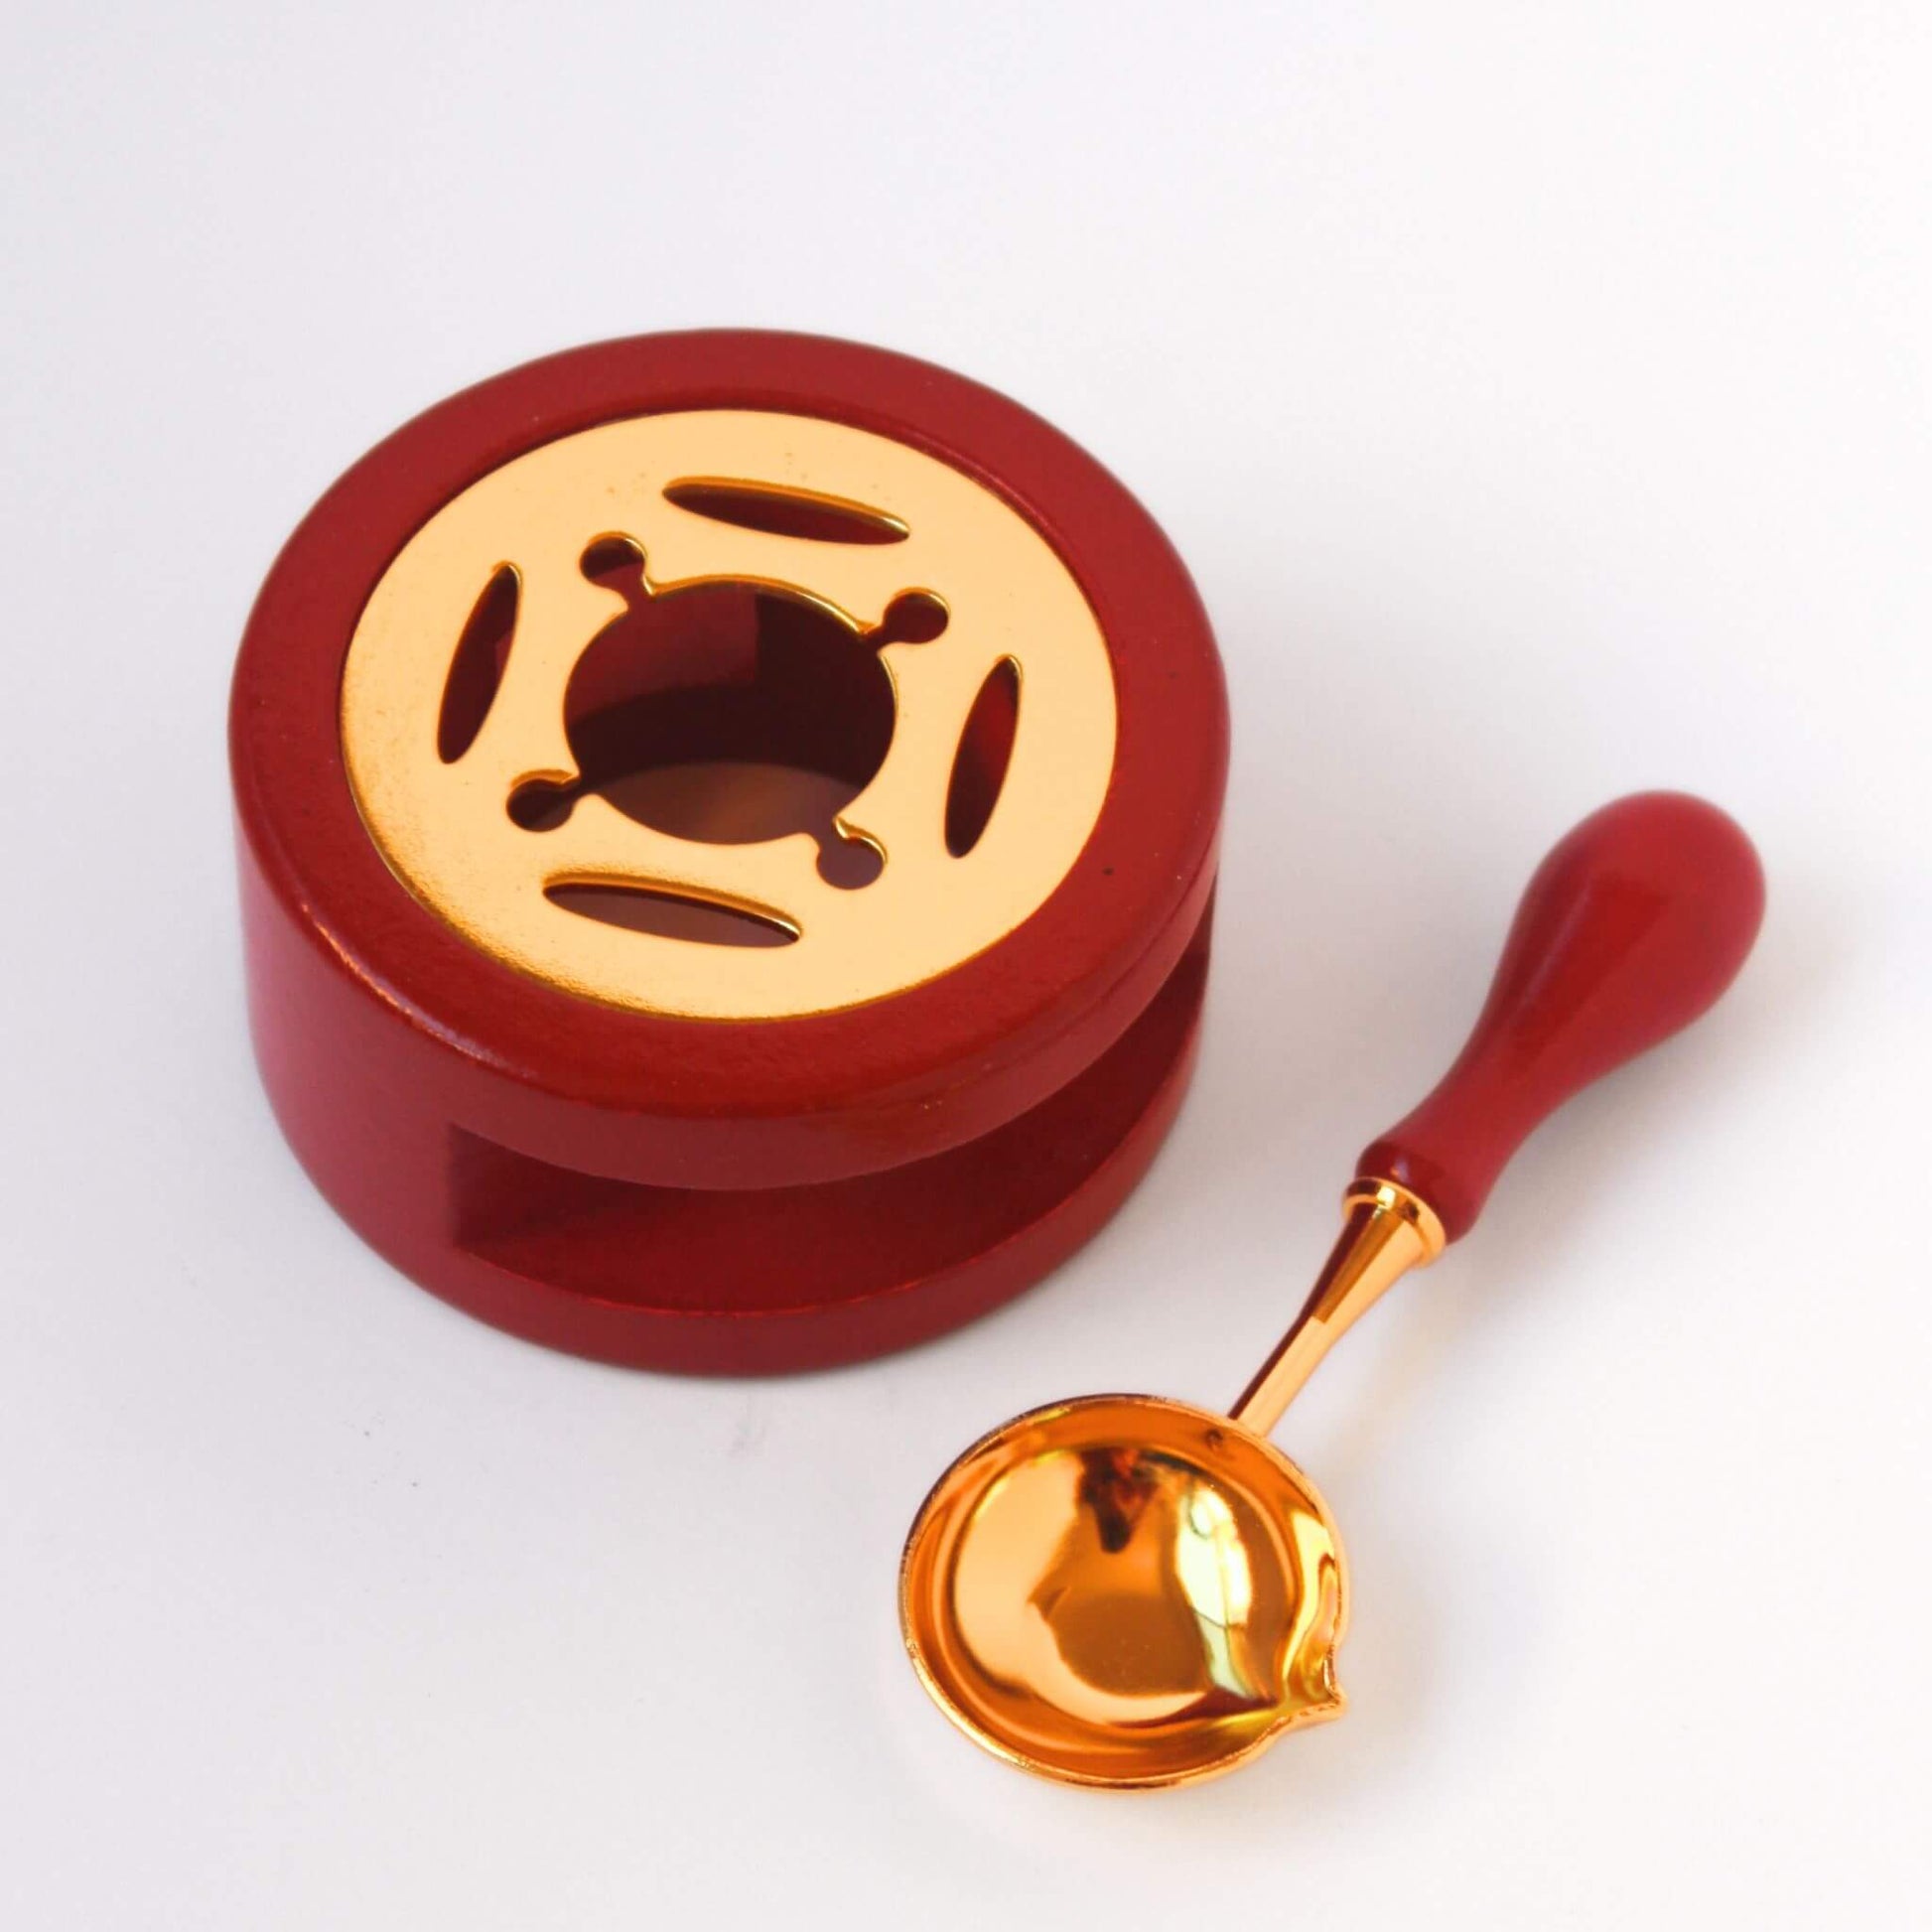 terracotta coloured wood and gold metal wax melting stove with matching spoon laid beside it